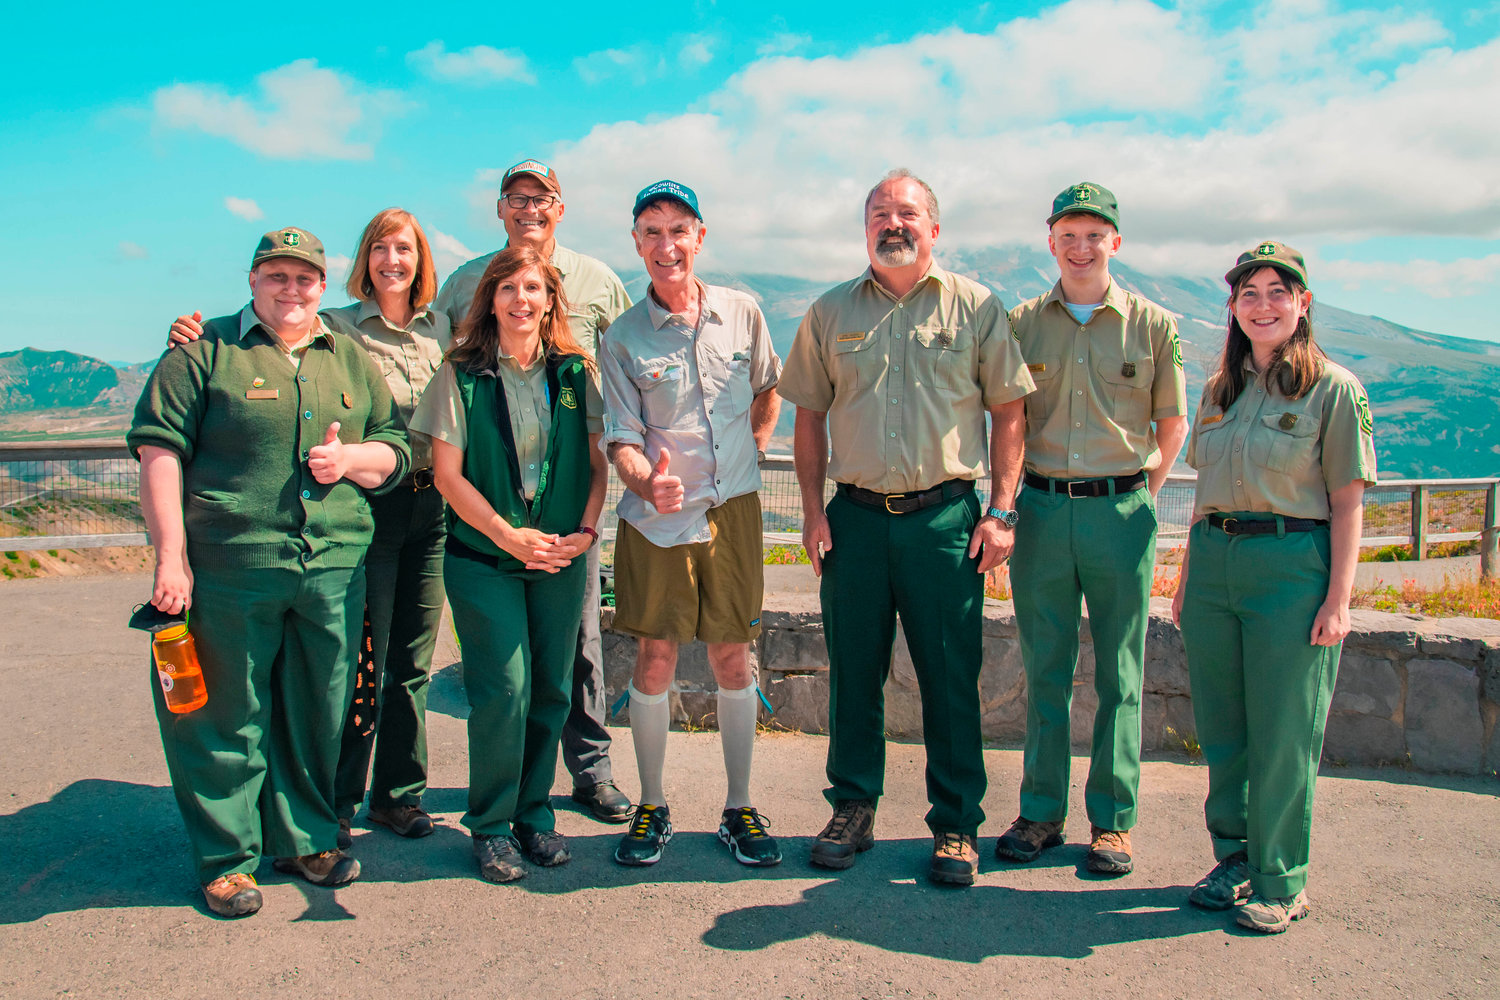 Members of the U.S. Forest Service pose for a photo with Gov. Jay Inslee and Bill Nye in front of Mount St. Helens during a visit to Jonhston Ridge.